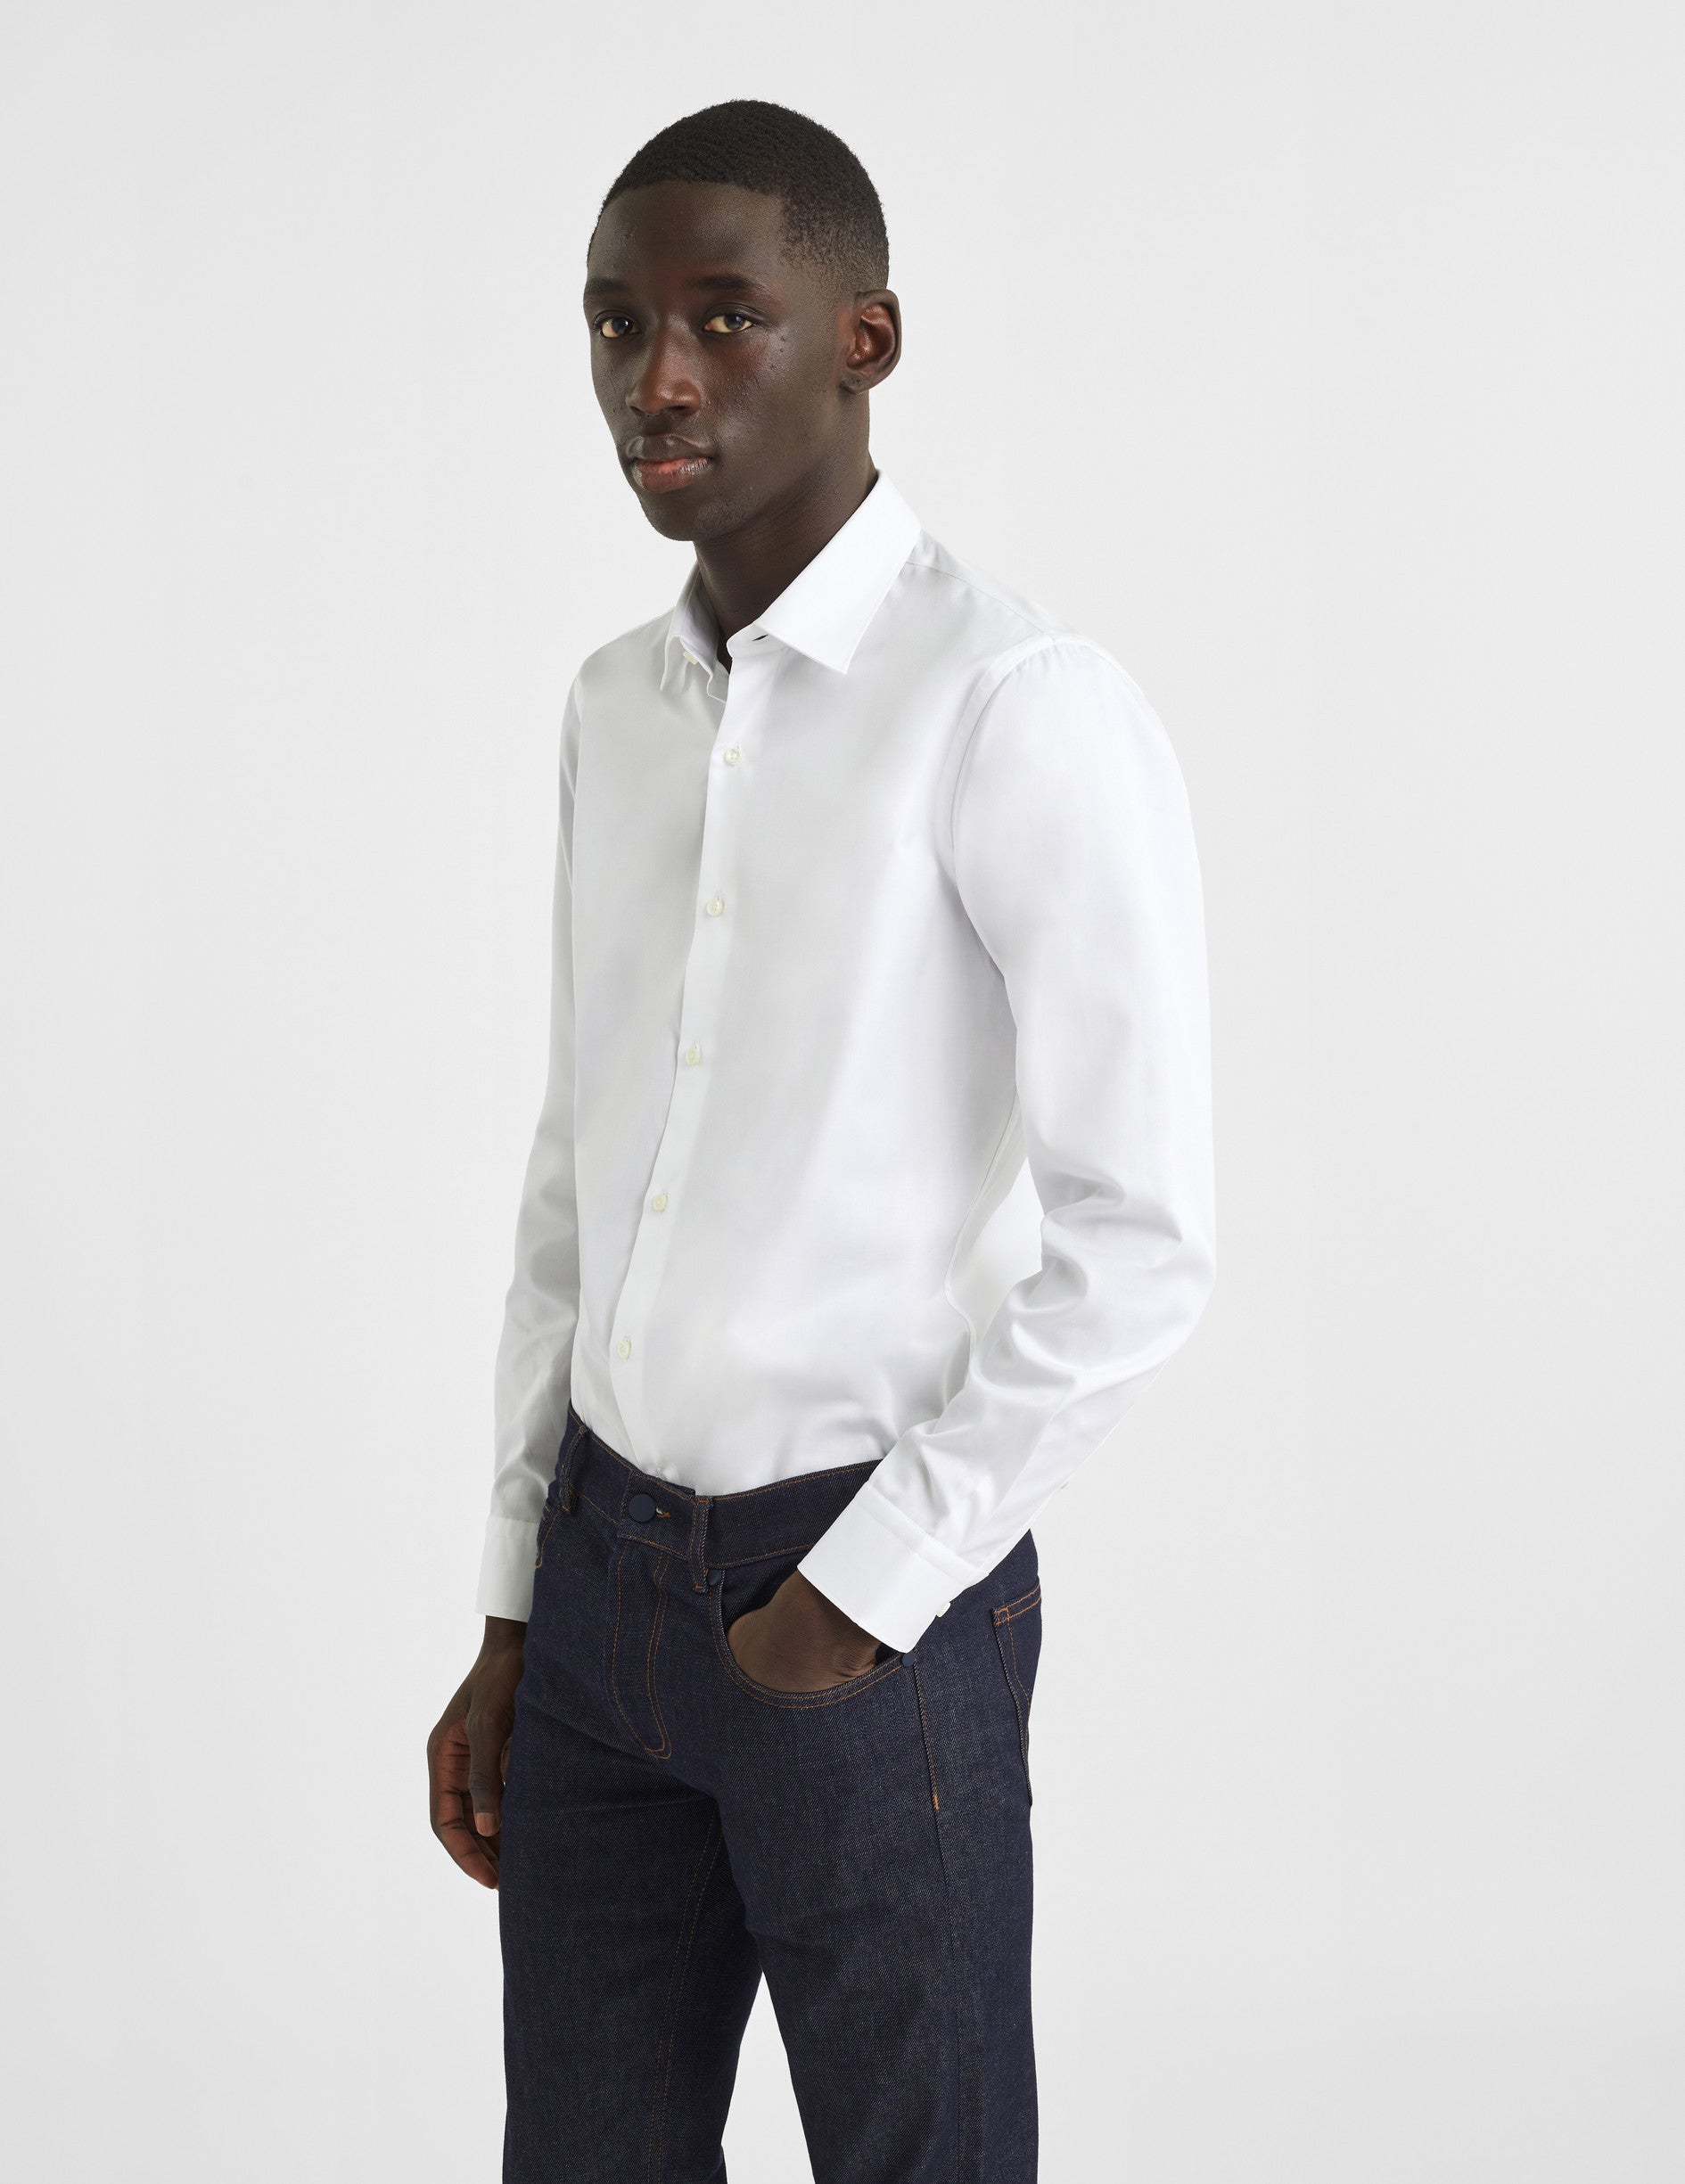 Semi-fitted white shirt - Twill - Figaret Collar